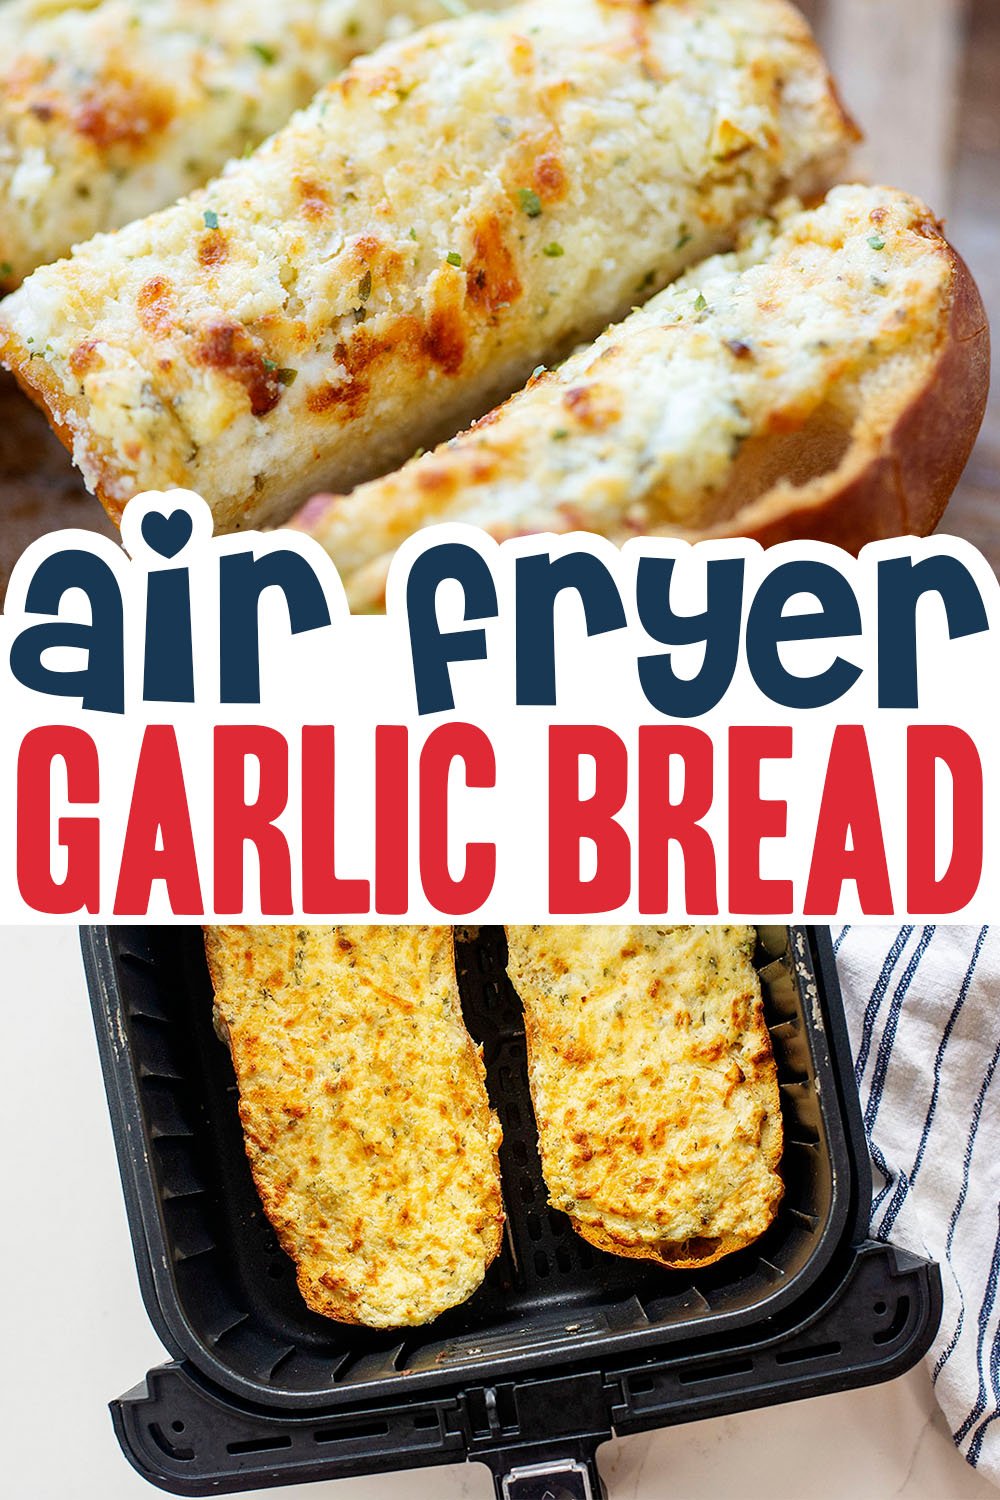 Try this recipe for a rich garlic bread with a little bit of cheese on it, cooked PERFECTLY in the air fryer!